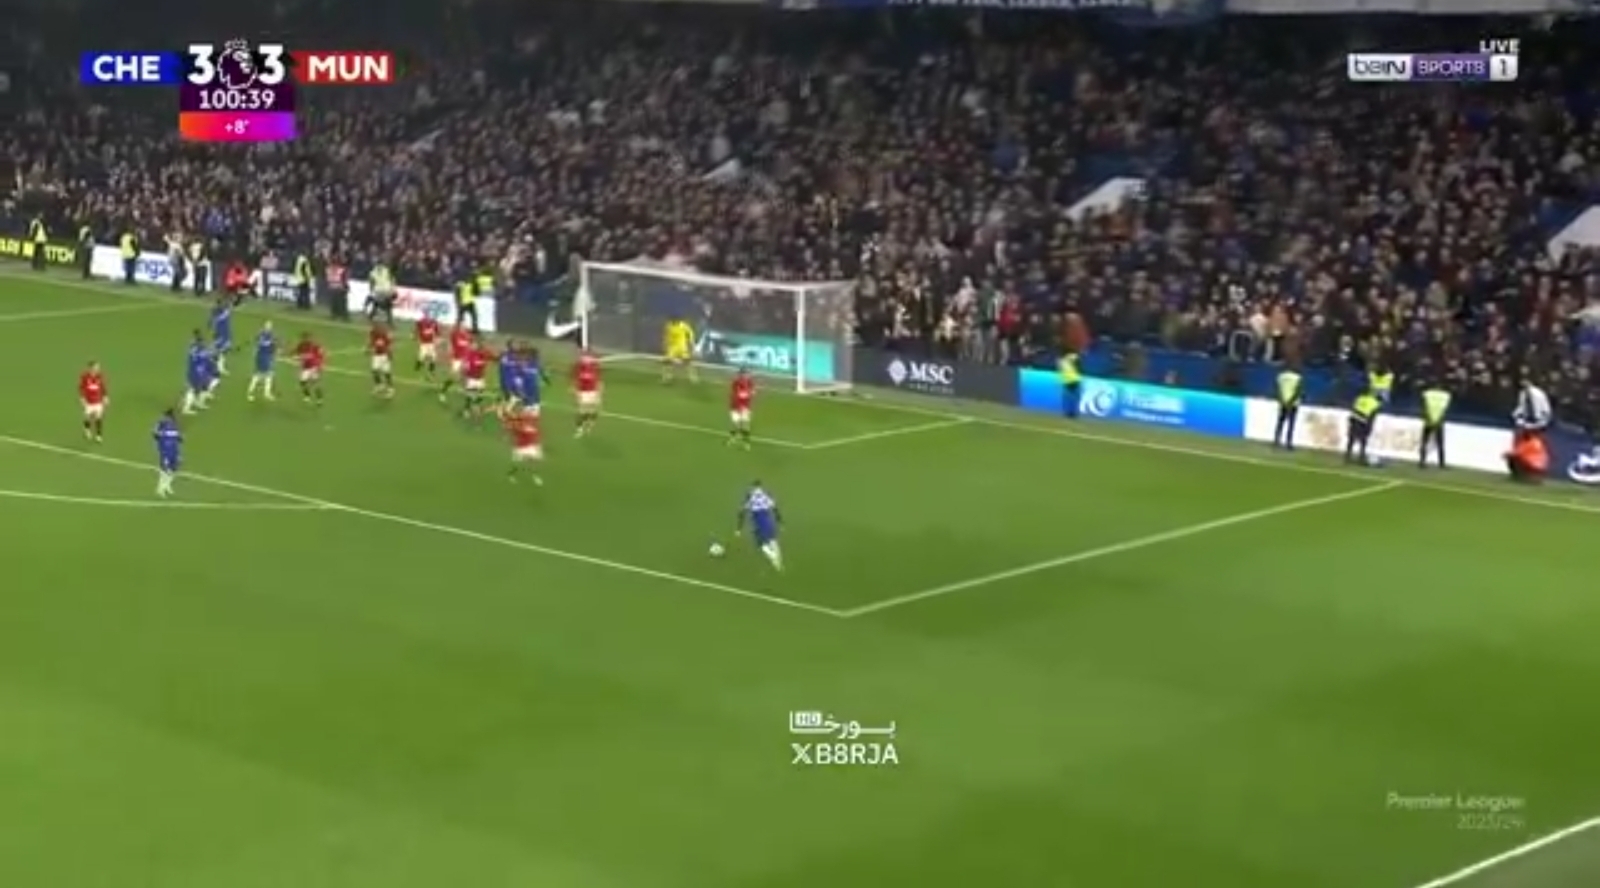 Watch: Unbelievable! Cole Palmer scores twice in 82 seconds to secure a 4-3 win for Chelsea against Manchester United